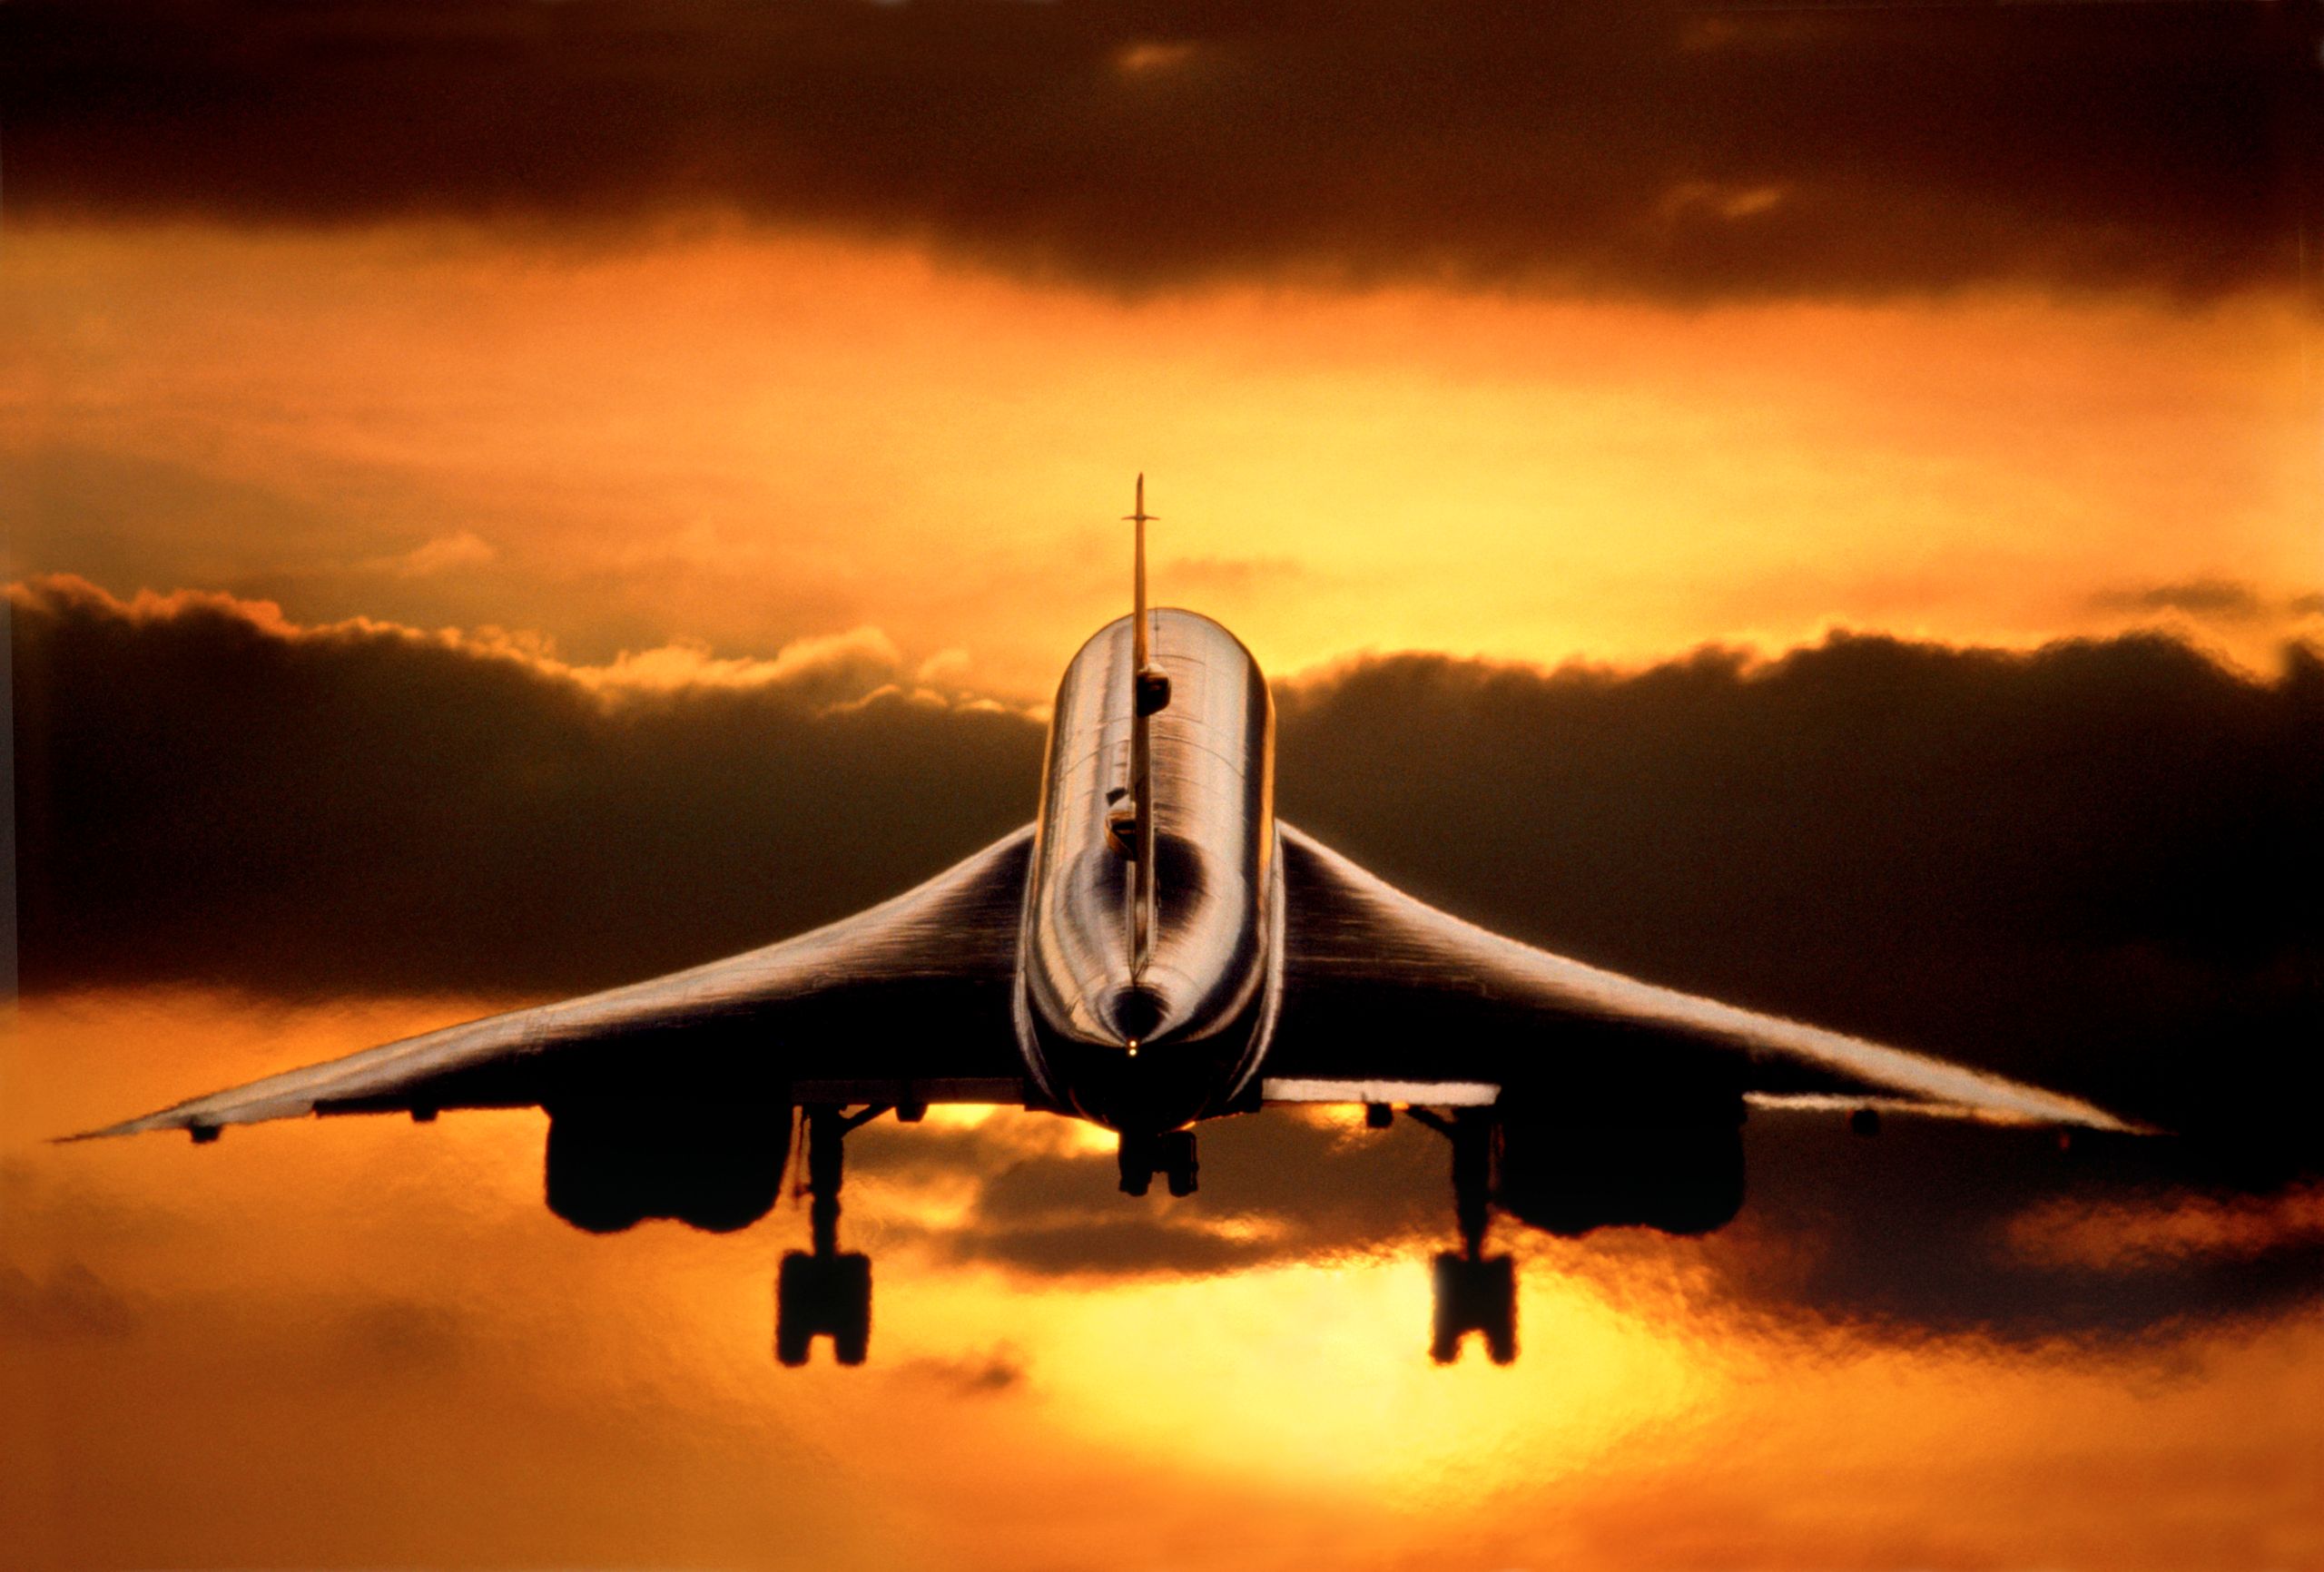 British Airways Aerospatiale BAC Concorde on final-approach at sunset